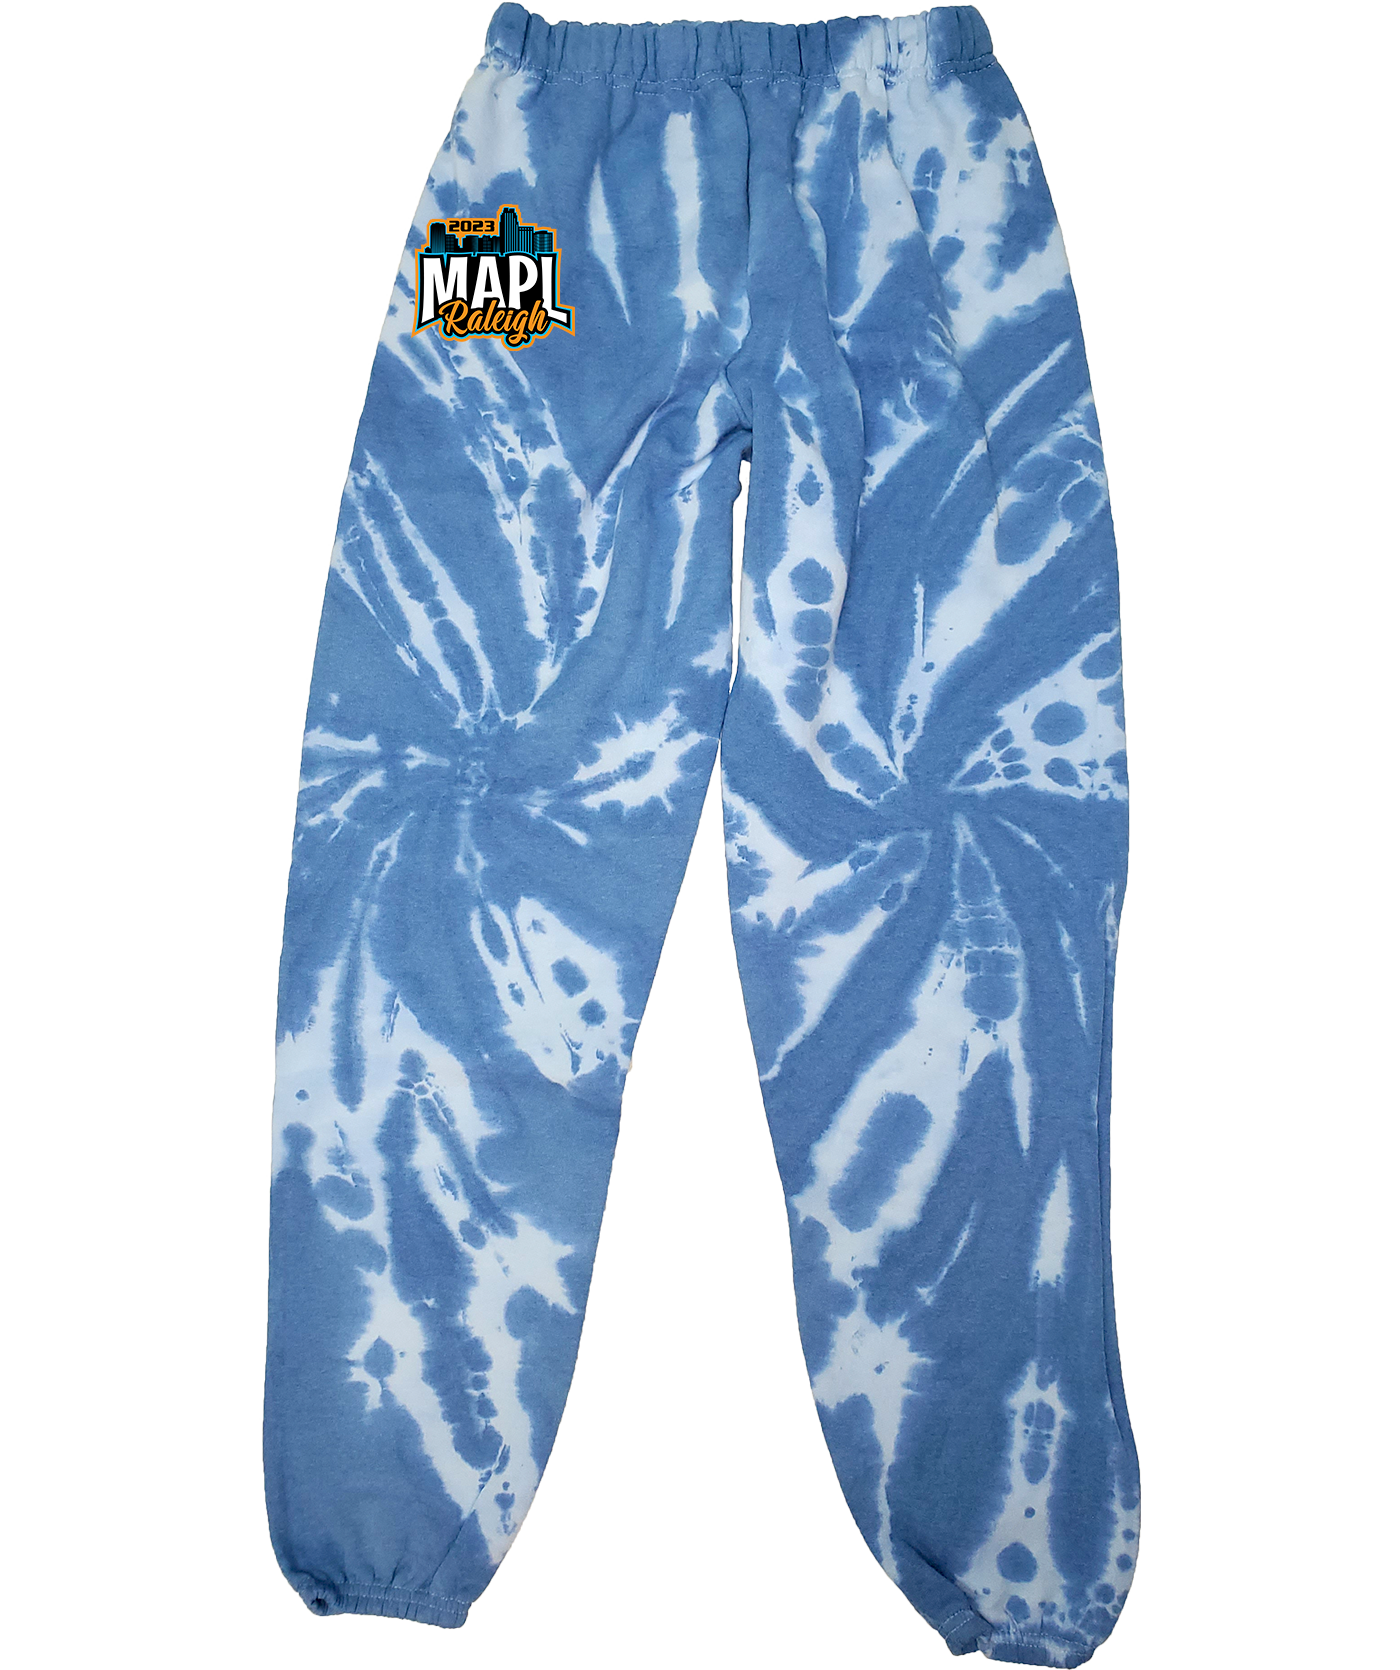 SWEAT PANTS - 2023 MAPL Raleigh